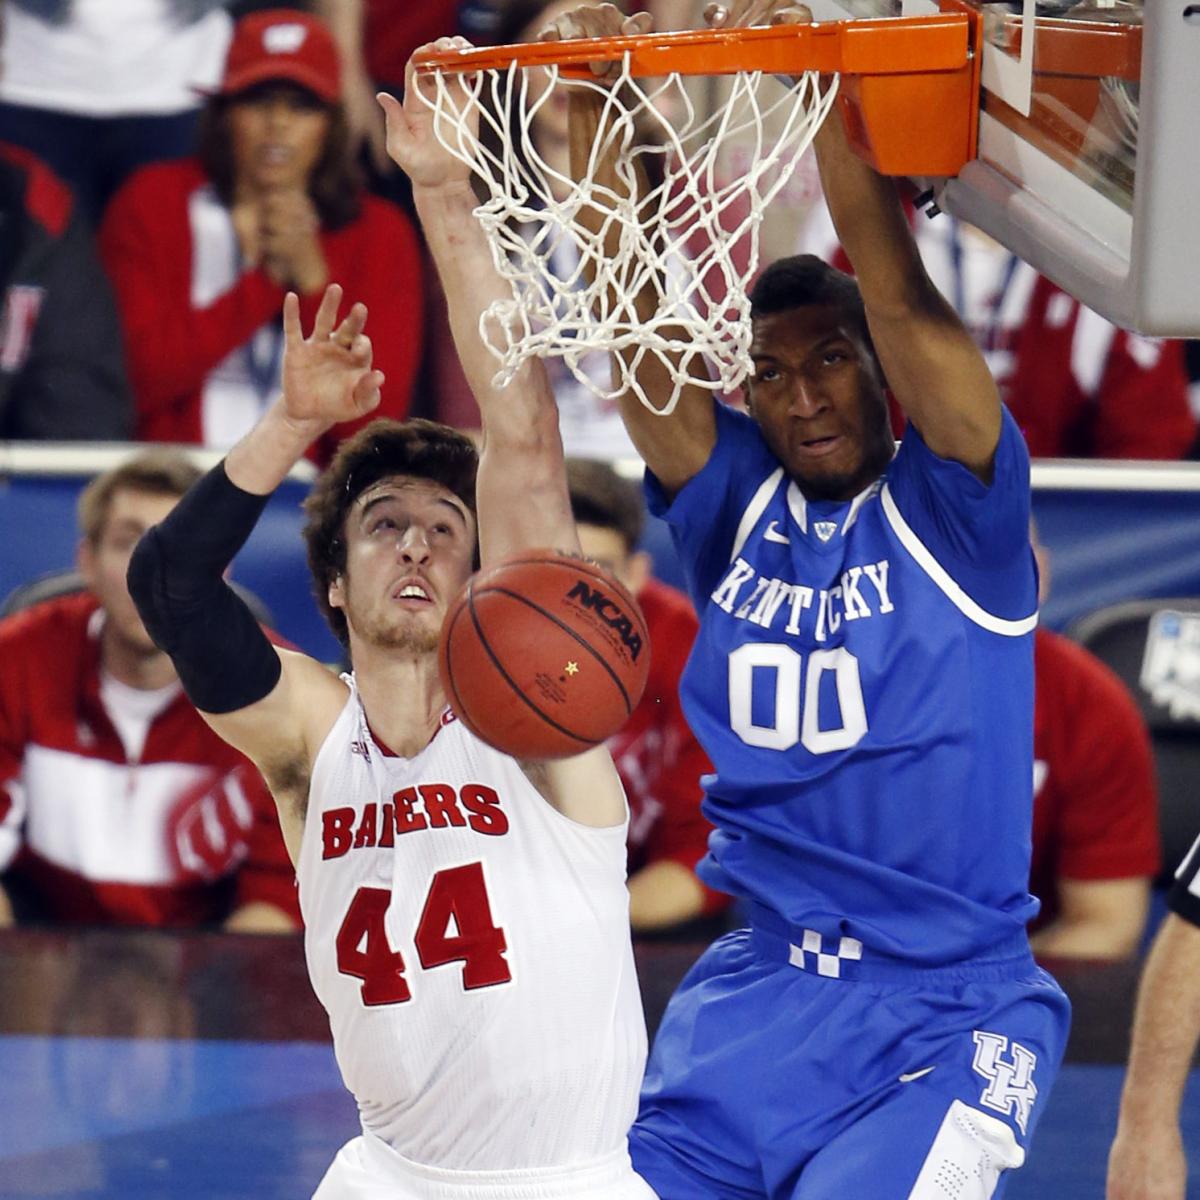 Kentucky Basketball: Why Wildcats Should Redshirt Marcus Lee in 2014-15